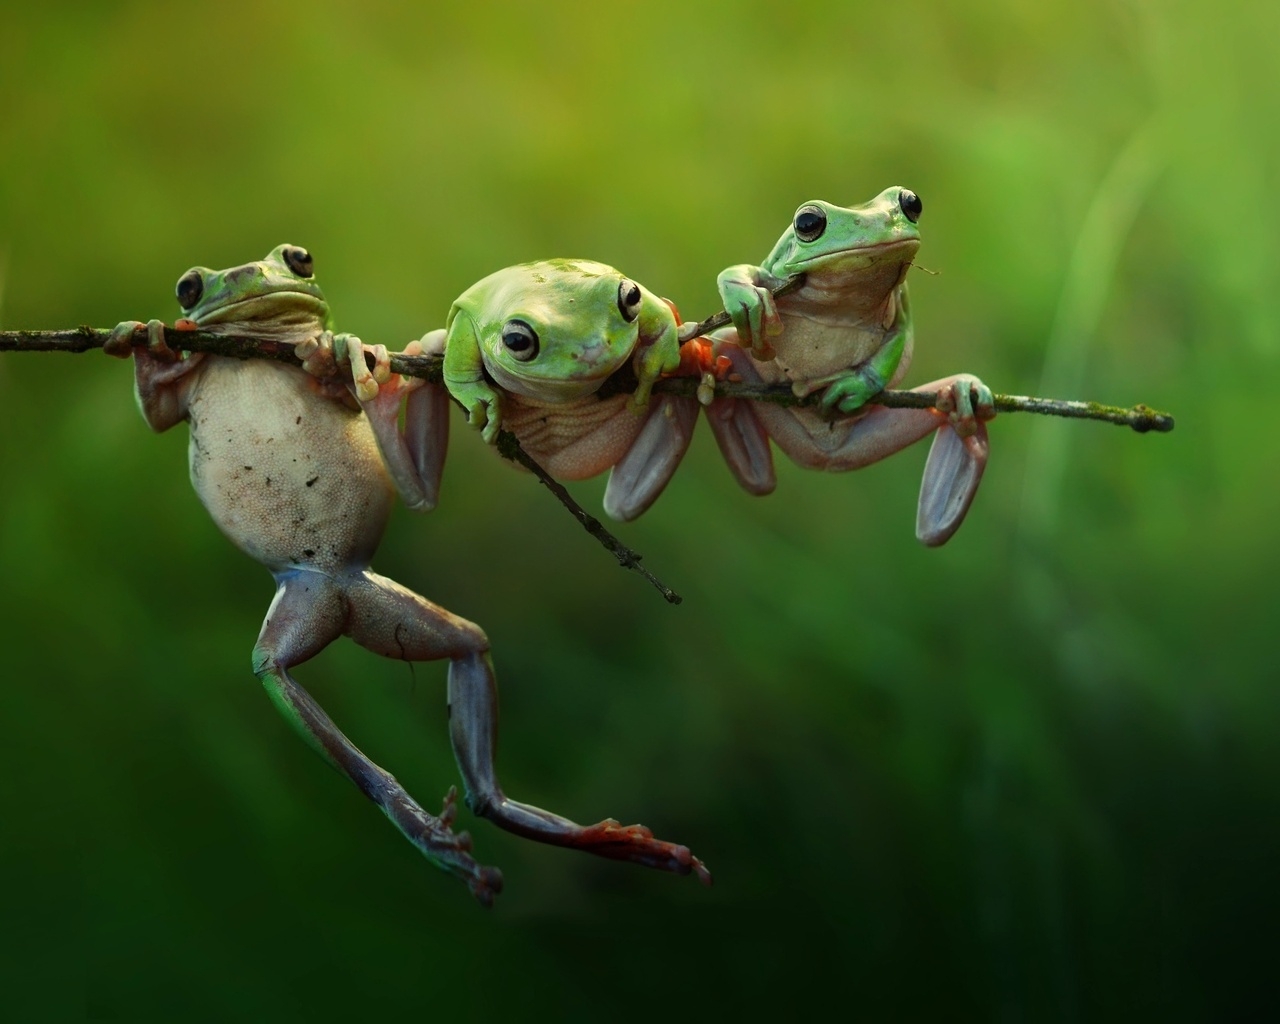 Three Frogs on a Branch for 1280 x 1024 resolution